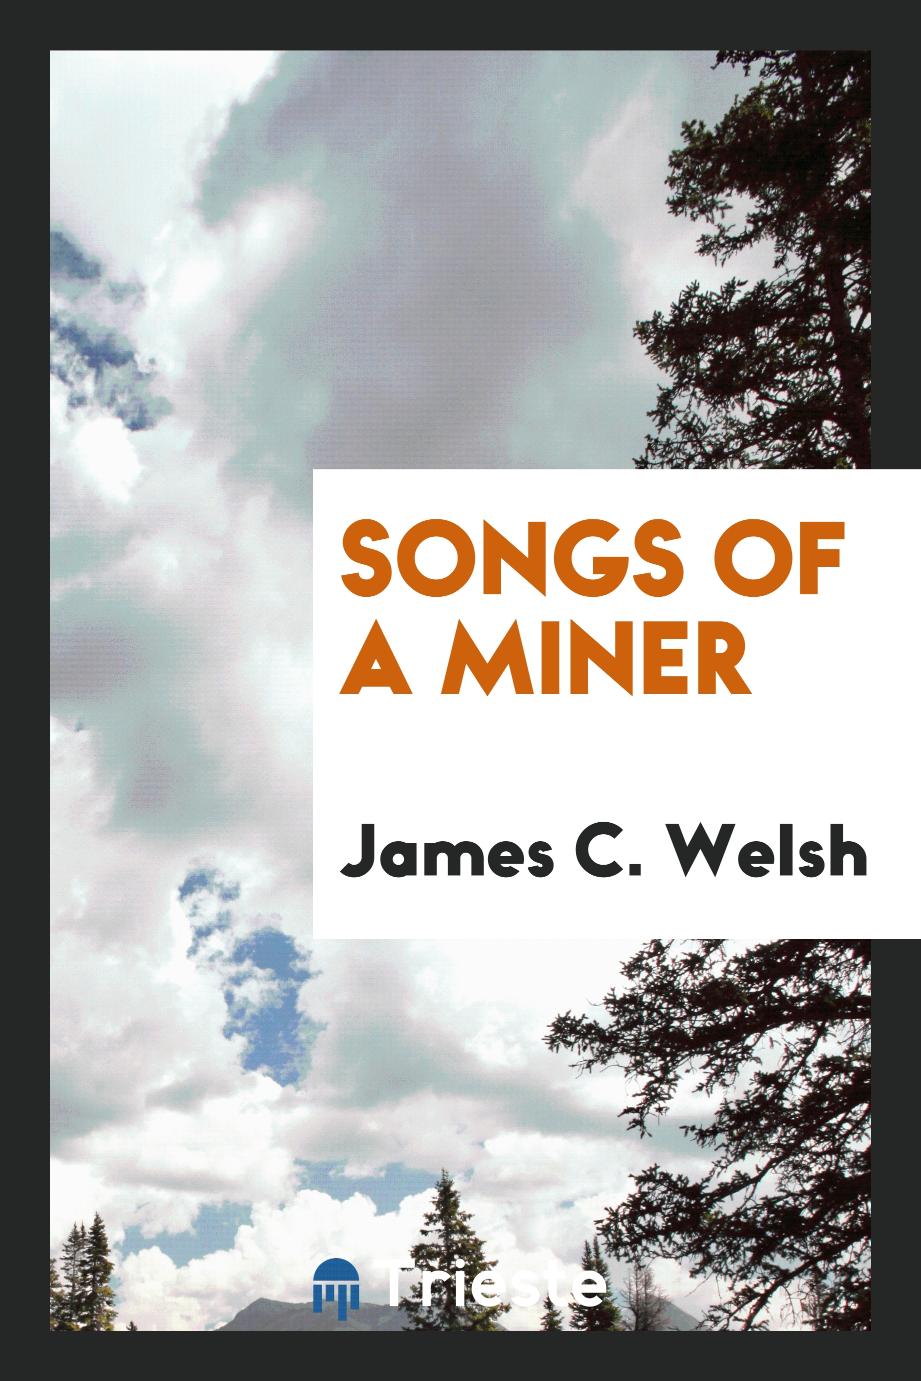 Songs of a miner